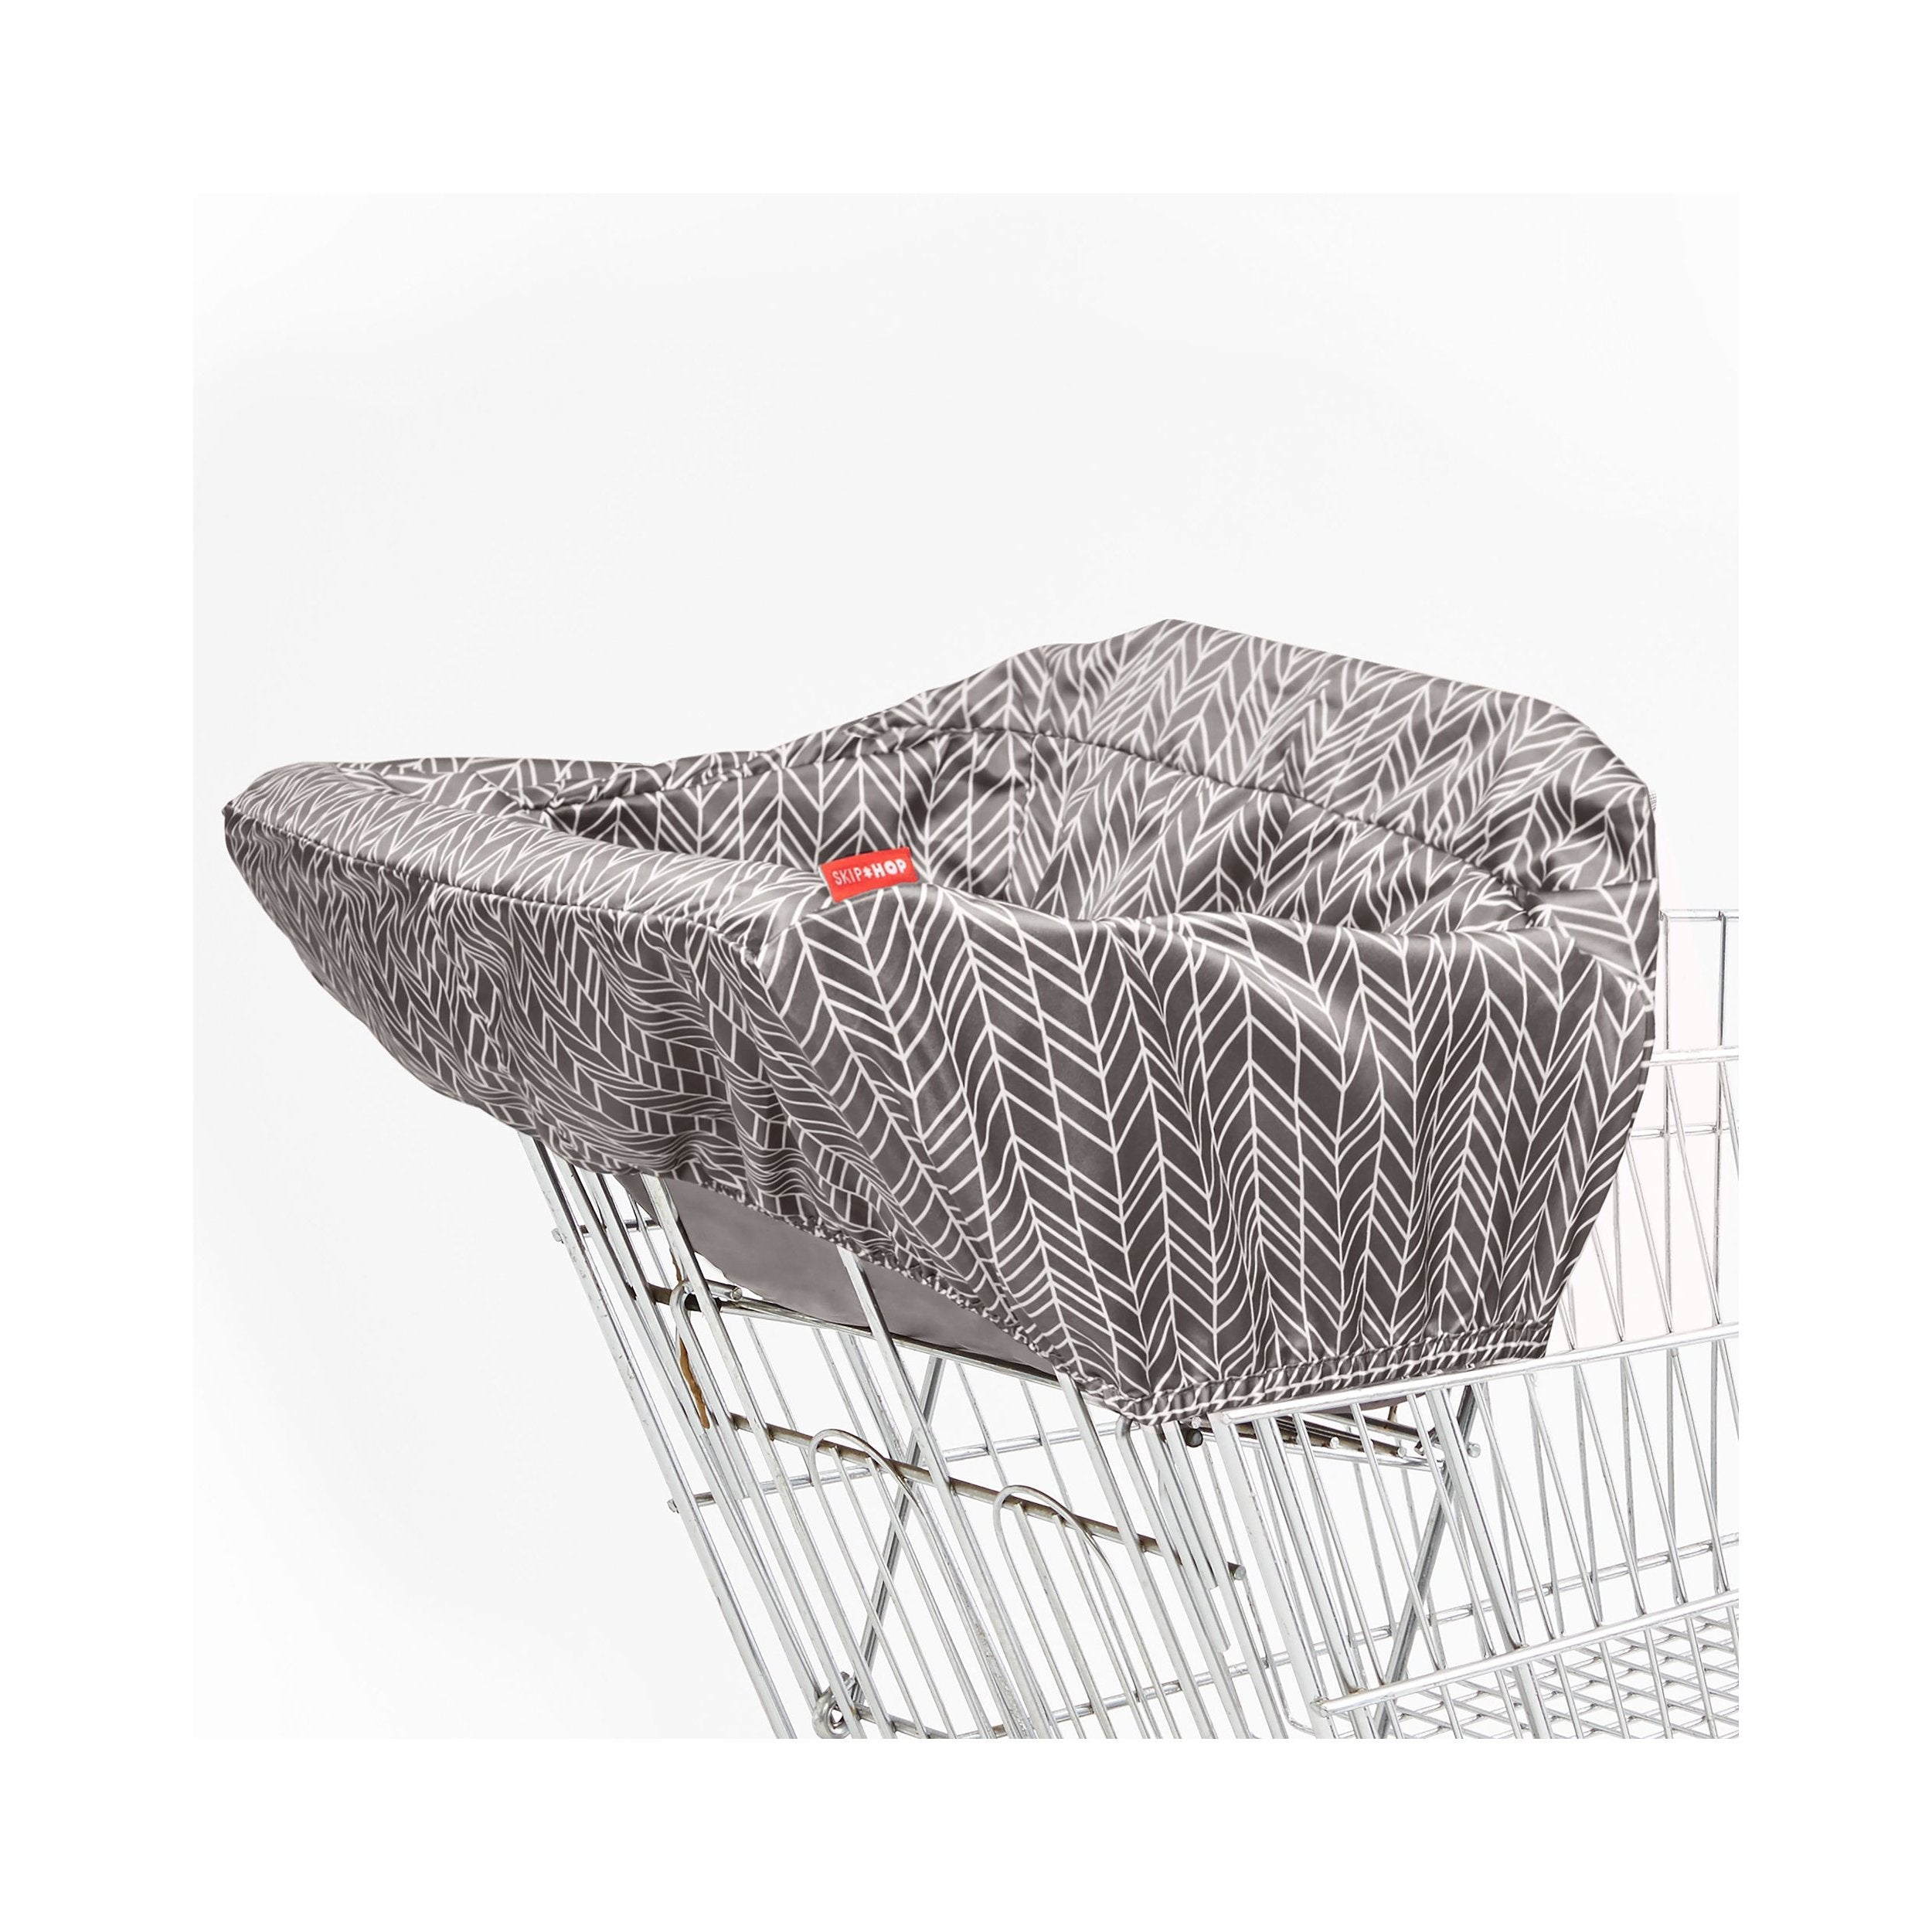 Skip Hop Take Cover Shopping Cart & Baby High Chair Cover - Grey Feather-SKIP HOP-Little Giant Kidz